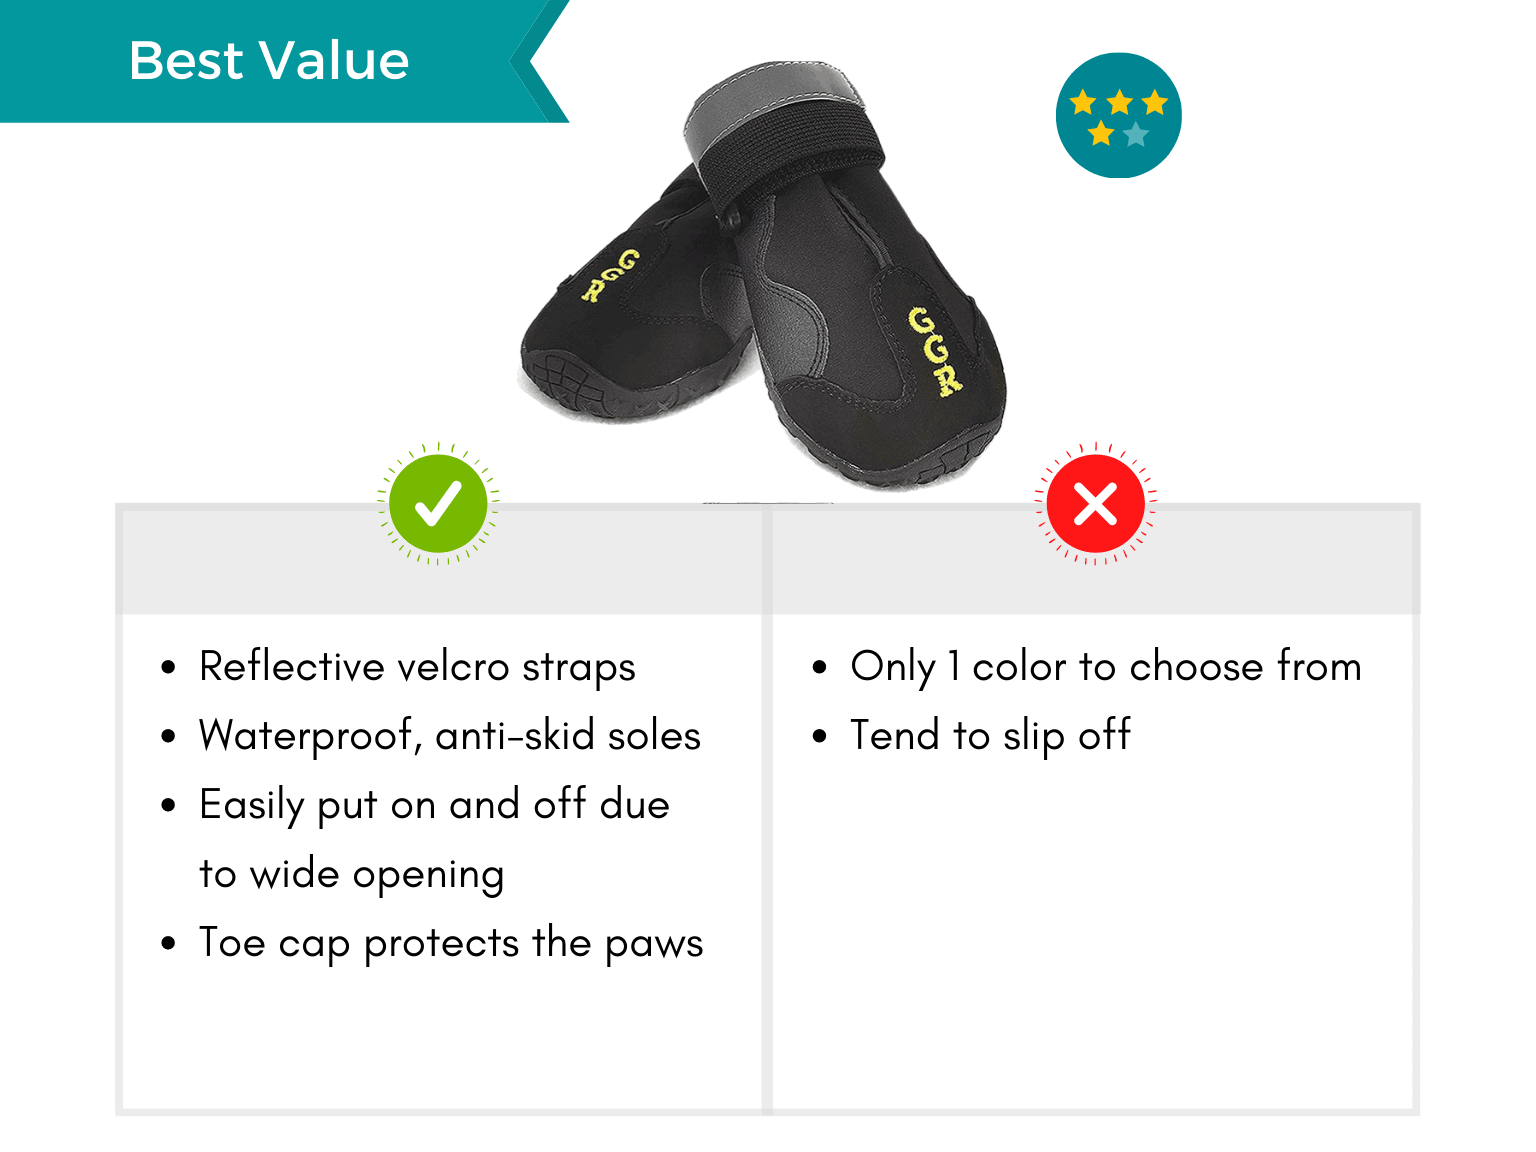 voopet Dog Boots Paw Protector Waterproof Dog Shoes with Reflective Nylon Elastic Straps to Adjust Tightness Non Slip Outsole Safety & Comfortable for Hiking Trail Running & Backpacking 4Pcs/Set 